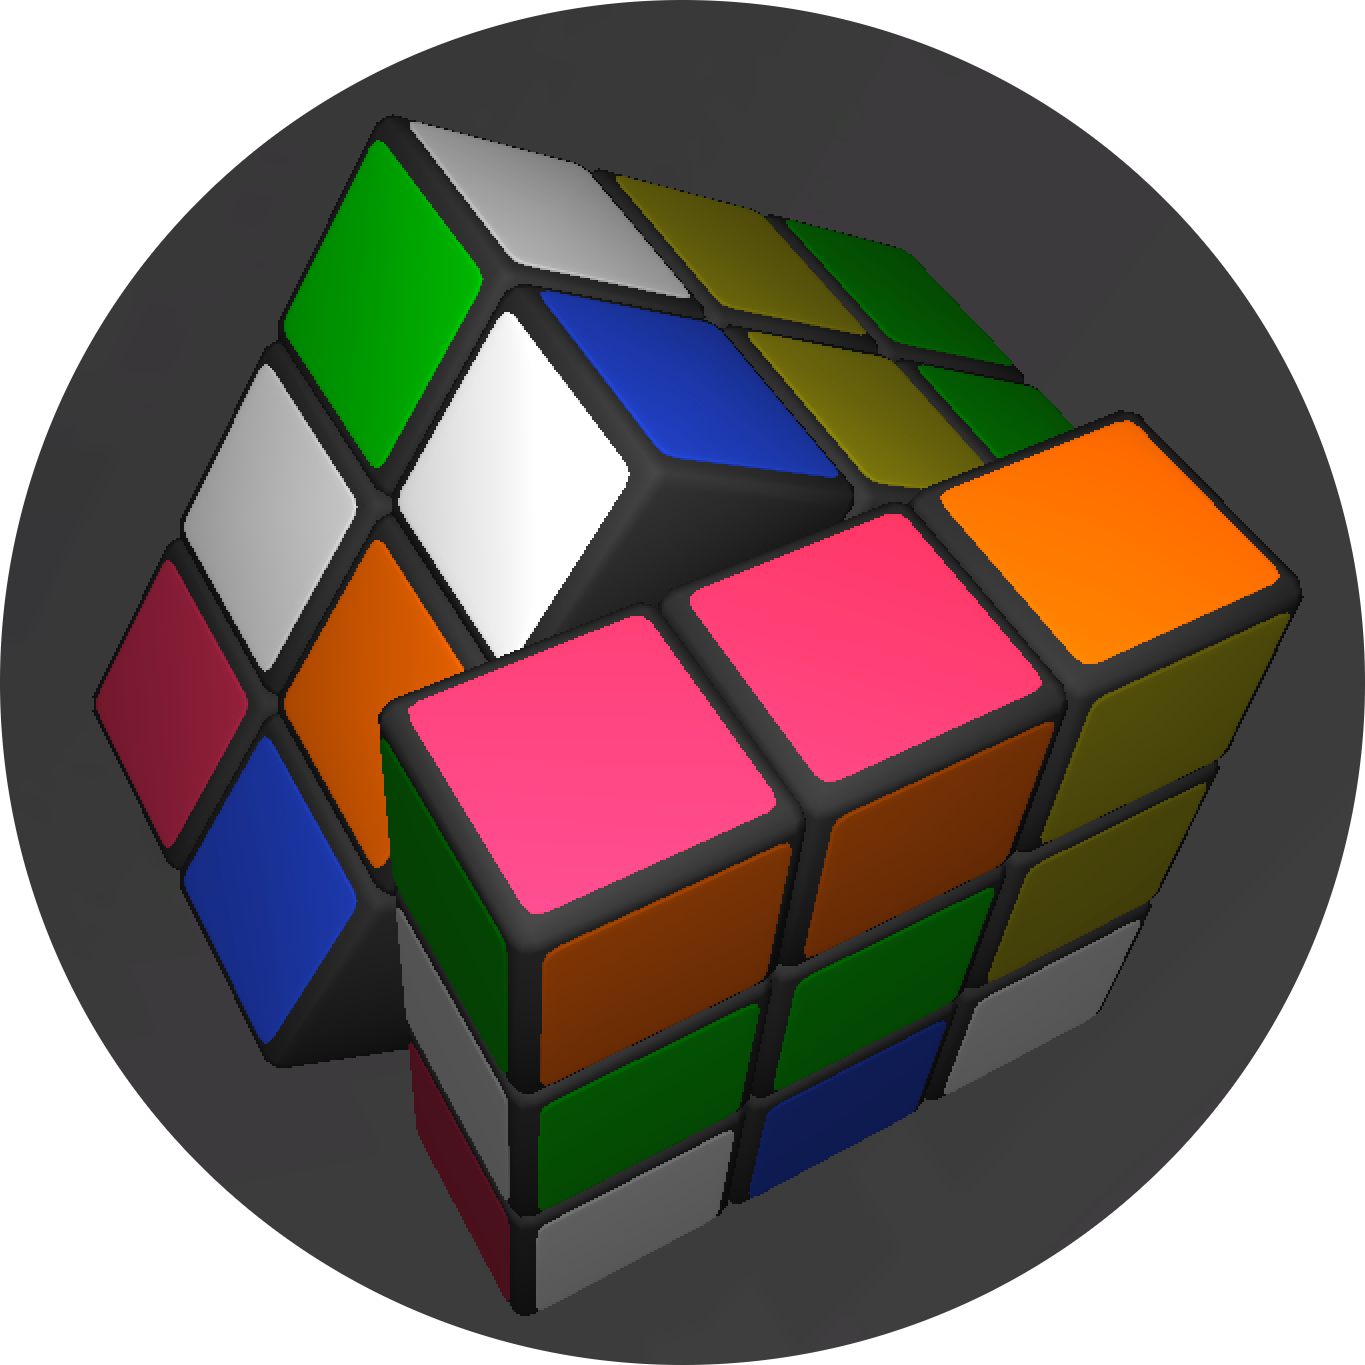 A Colorful Cubes With Different Colored Squares